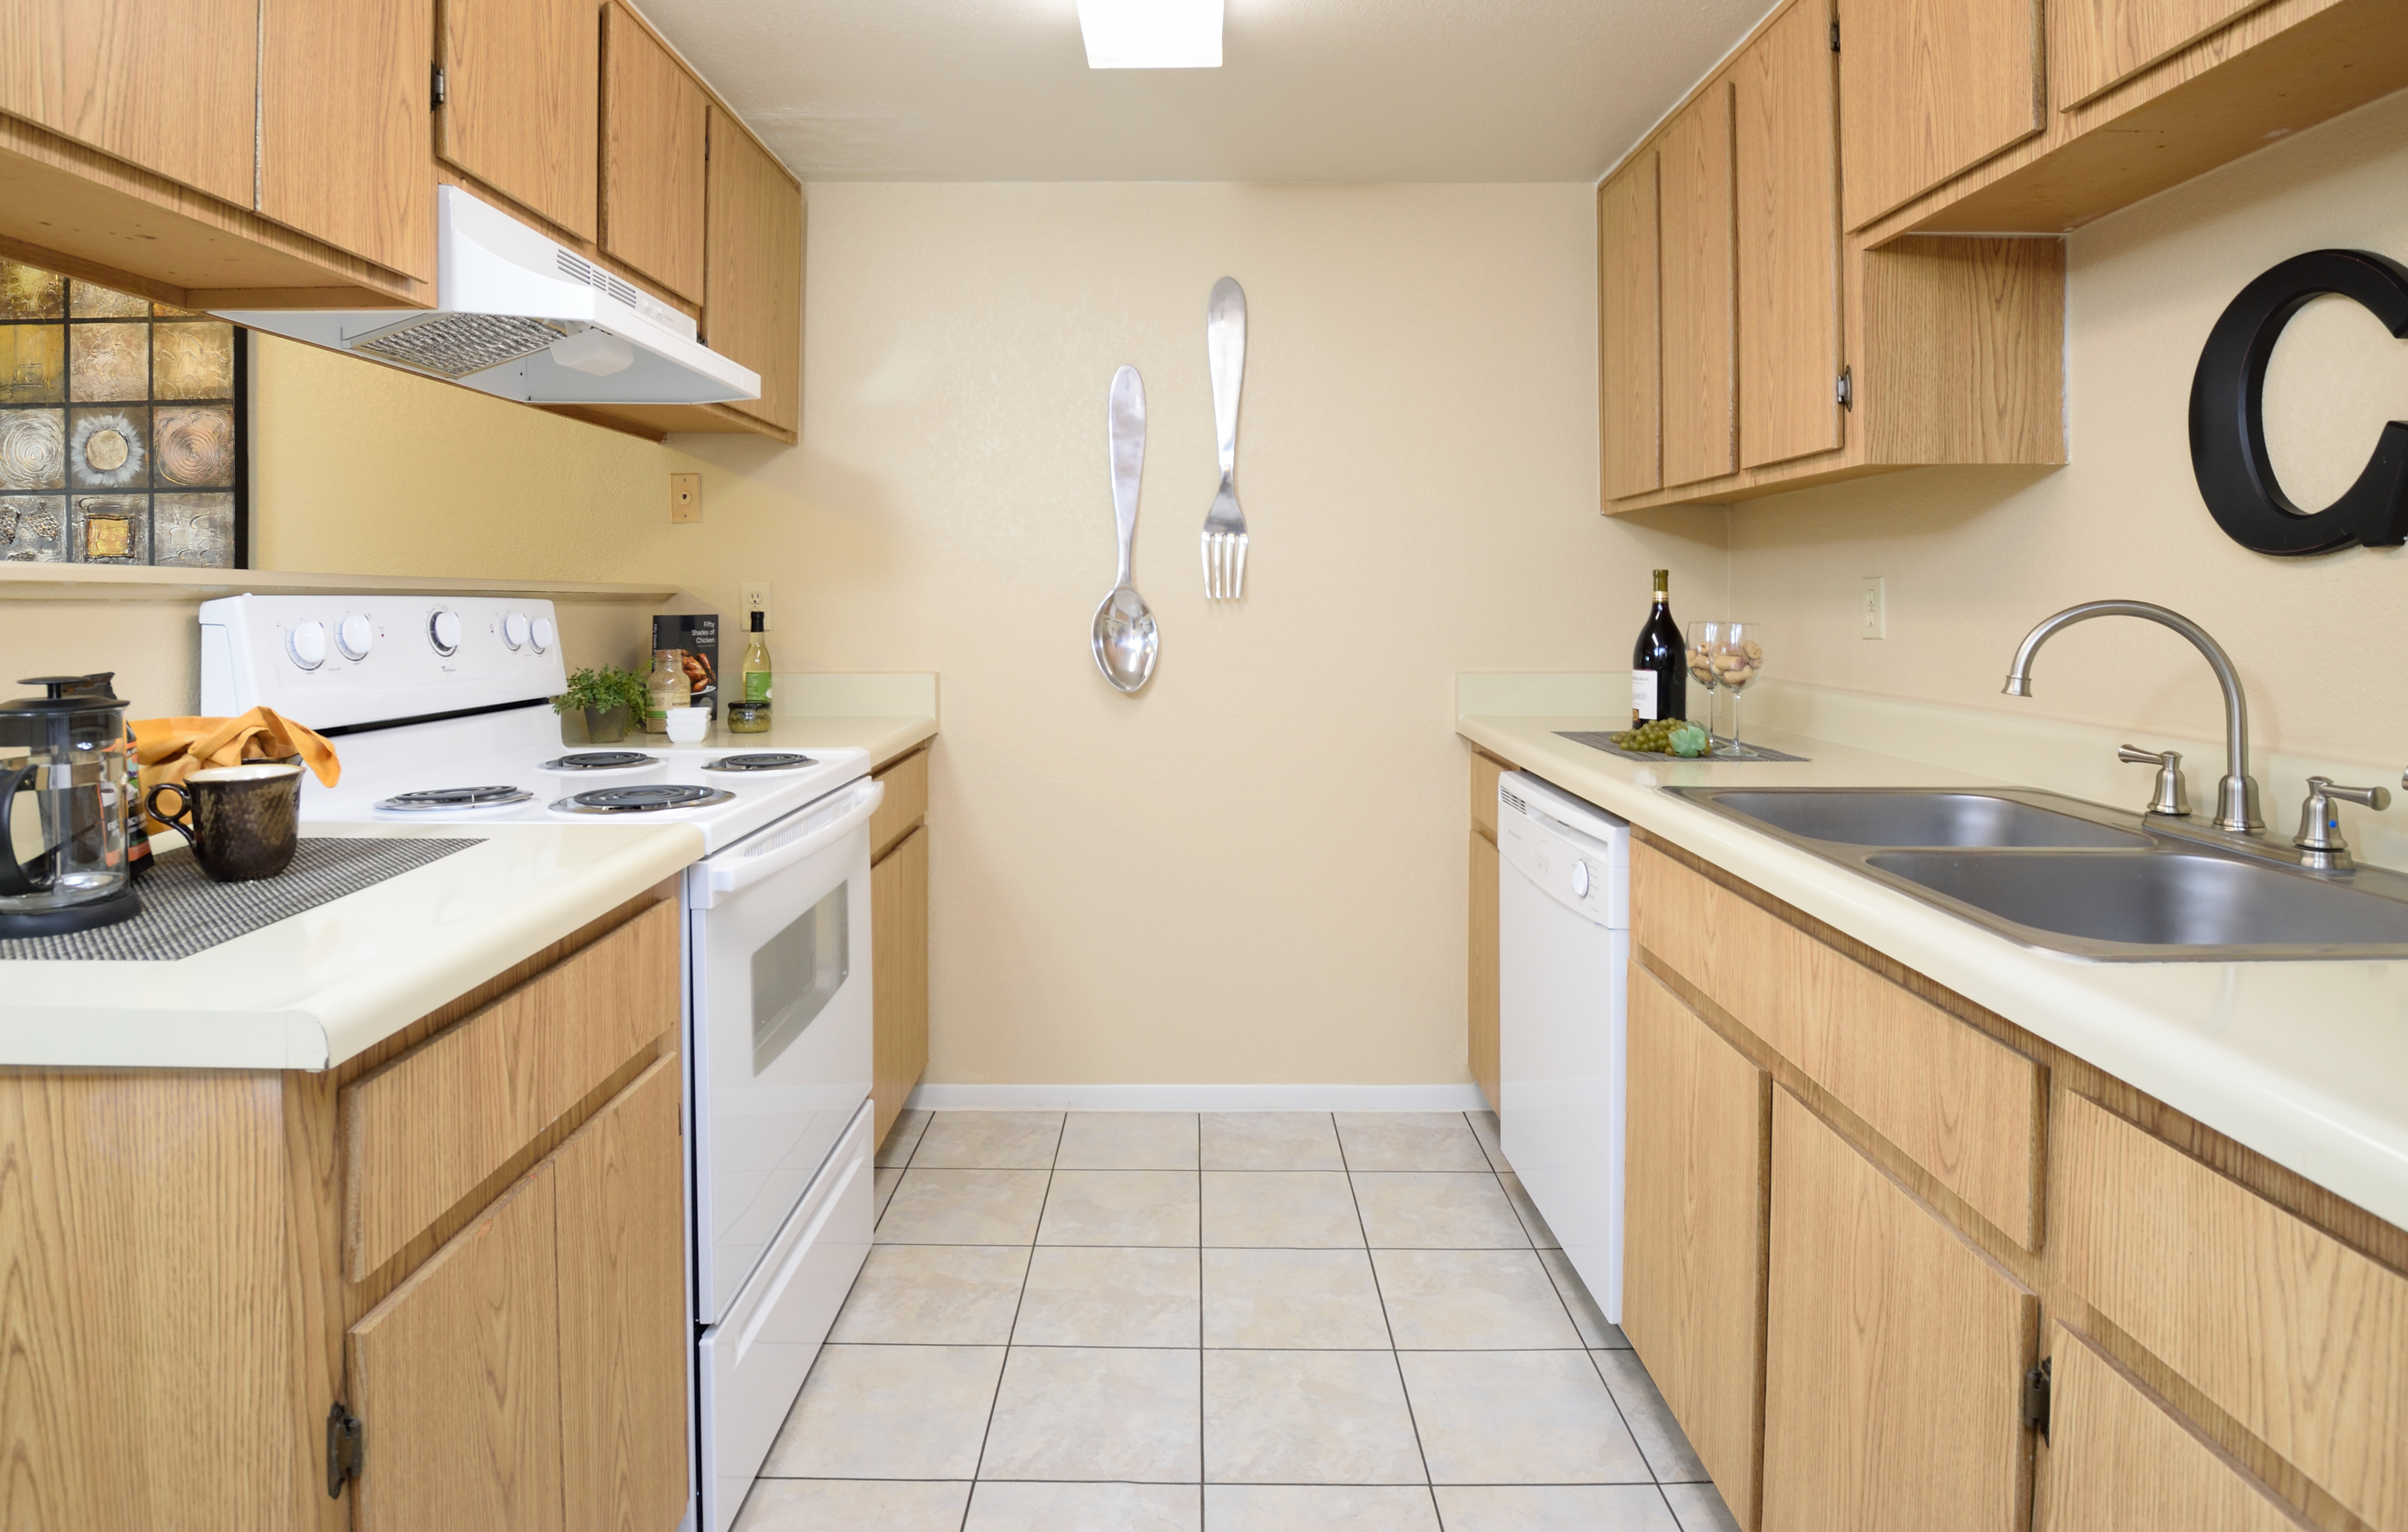 View of Kitchen, Showing Galley Style, Gas Appliances, Tile Flooring, Cabinets, Double Sink and Counter Tops,  at Camelot Apartments